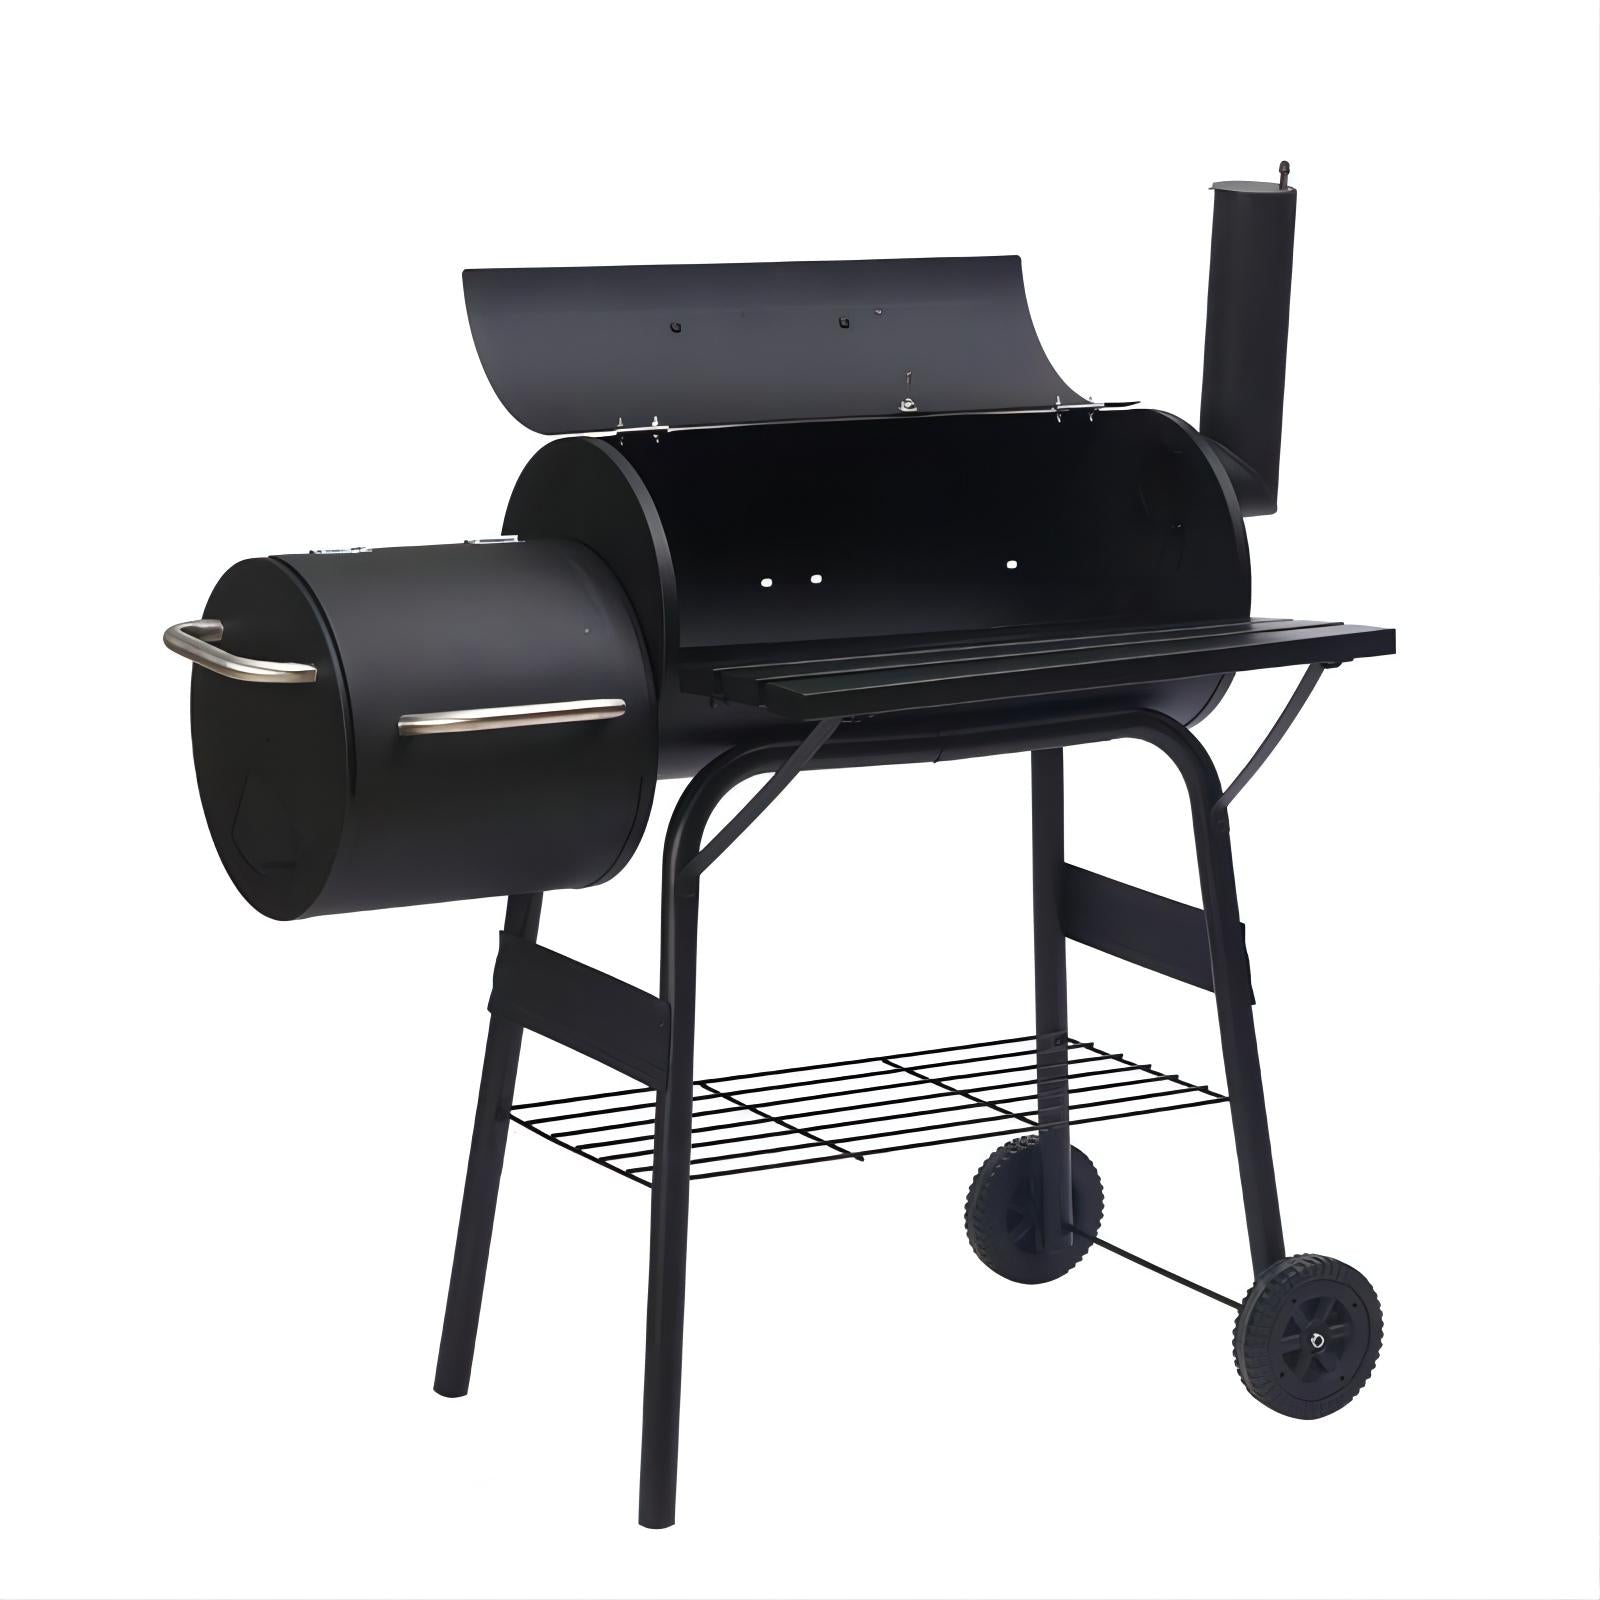 Charcoal Grill with Offset Smoker and Side Table in Black Plus a Cover